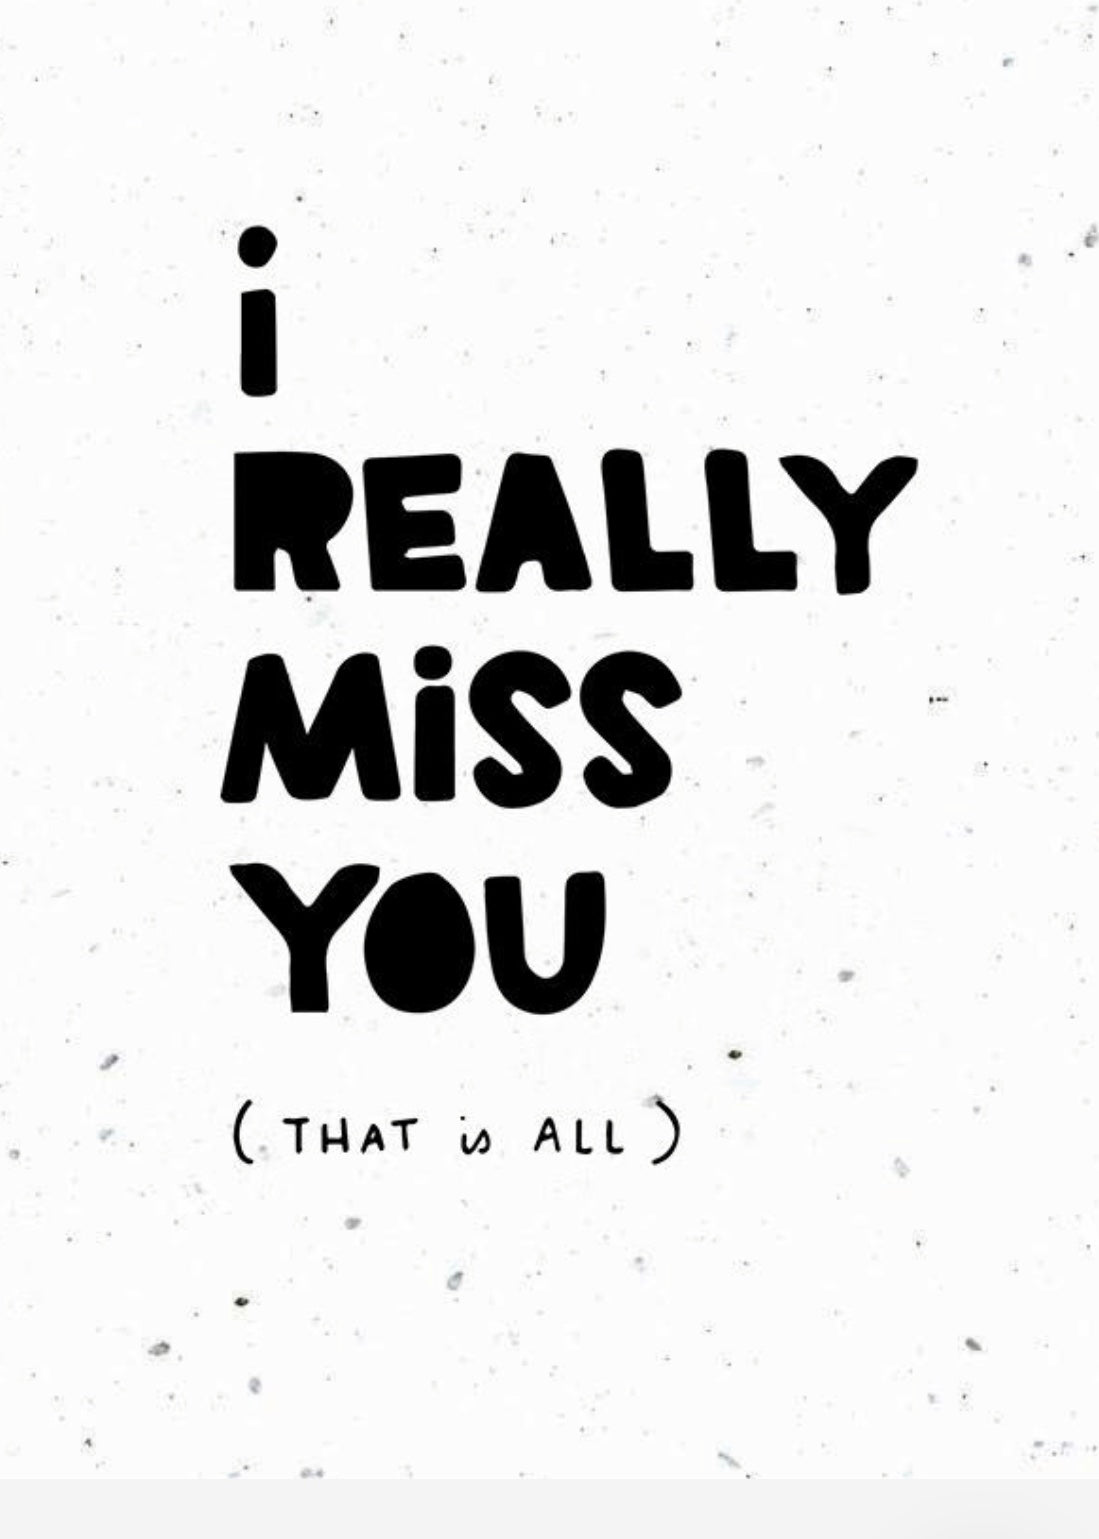 I really miss you Greeting Card